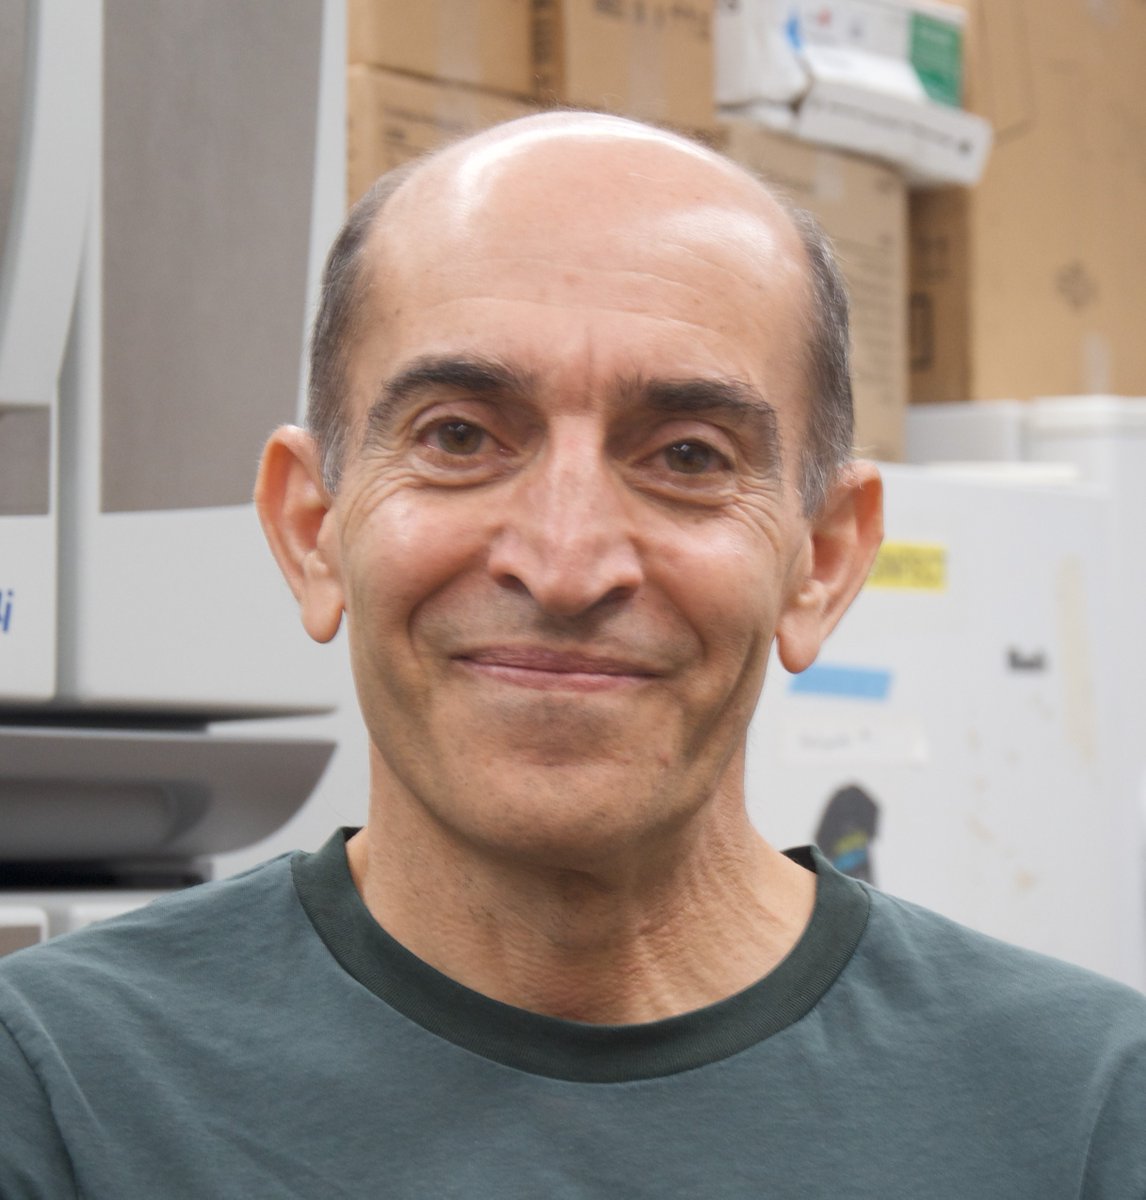 SAVE THE DATE! for our Genetics Seminar on 01/30/24 at 11:30am from Dr. Danesh Moazed, presenting 'Epigenetic Inheritance and Chromatin-associated RNA Decay. ' Link below.... medicine.yale.edu/event/gensem01… All @Yale affiliates welcome!